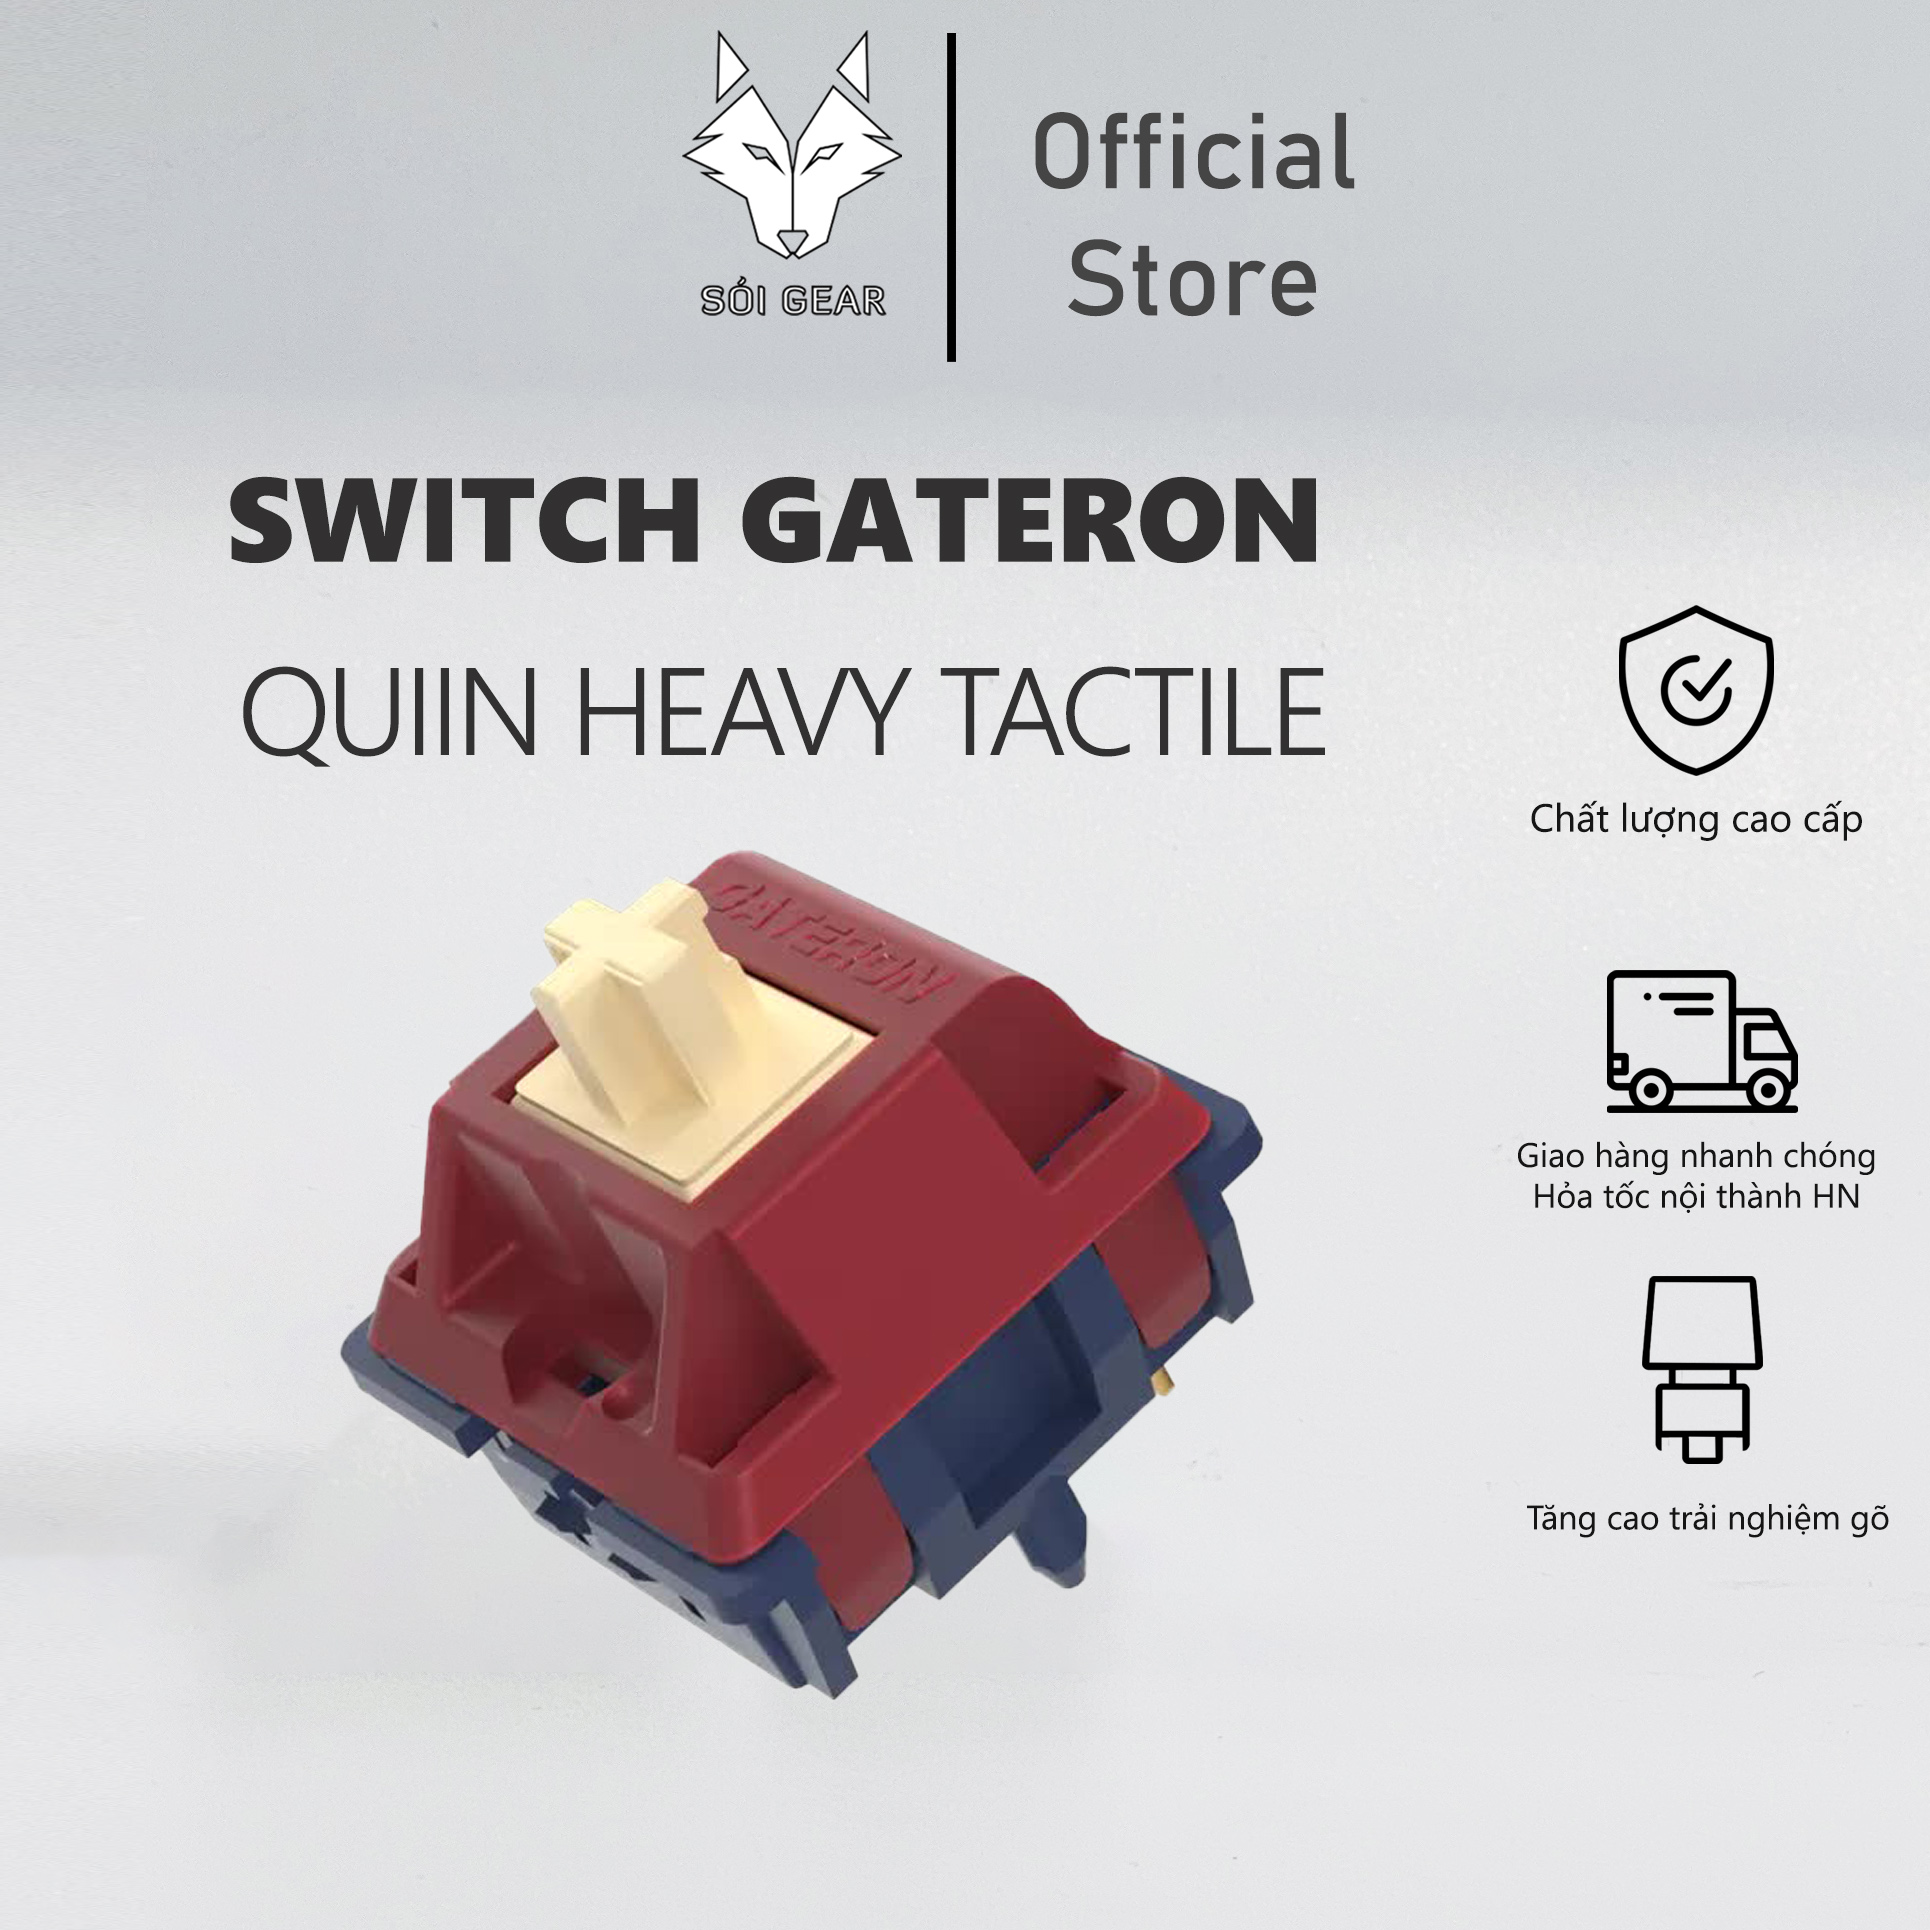 Switch Gateron Quinn Heavy Tactile